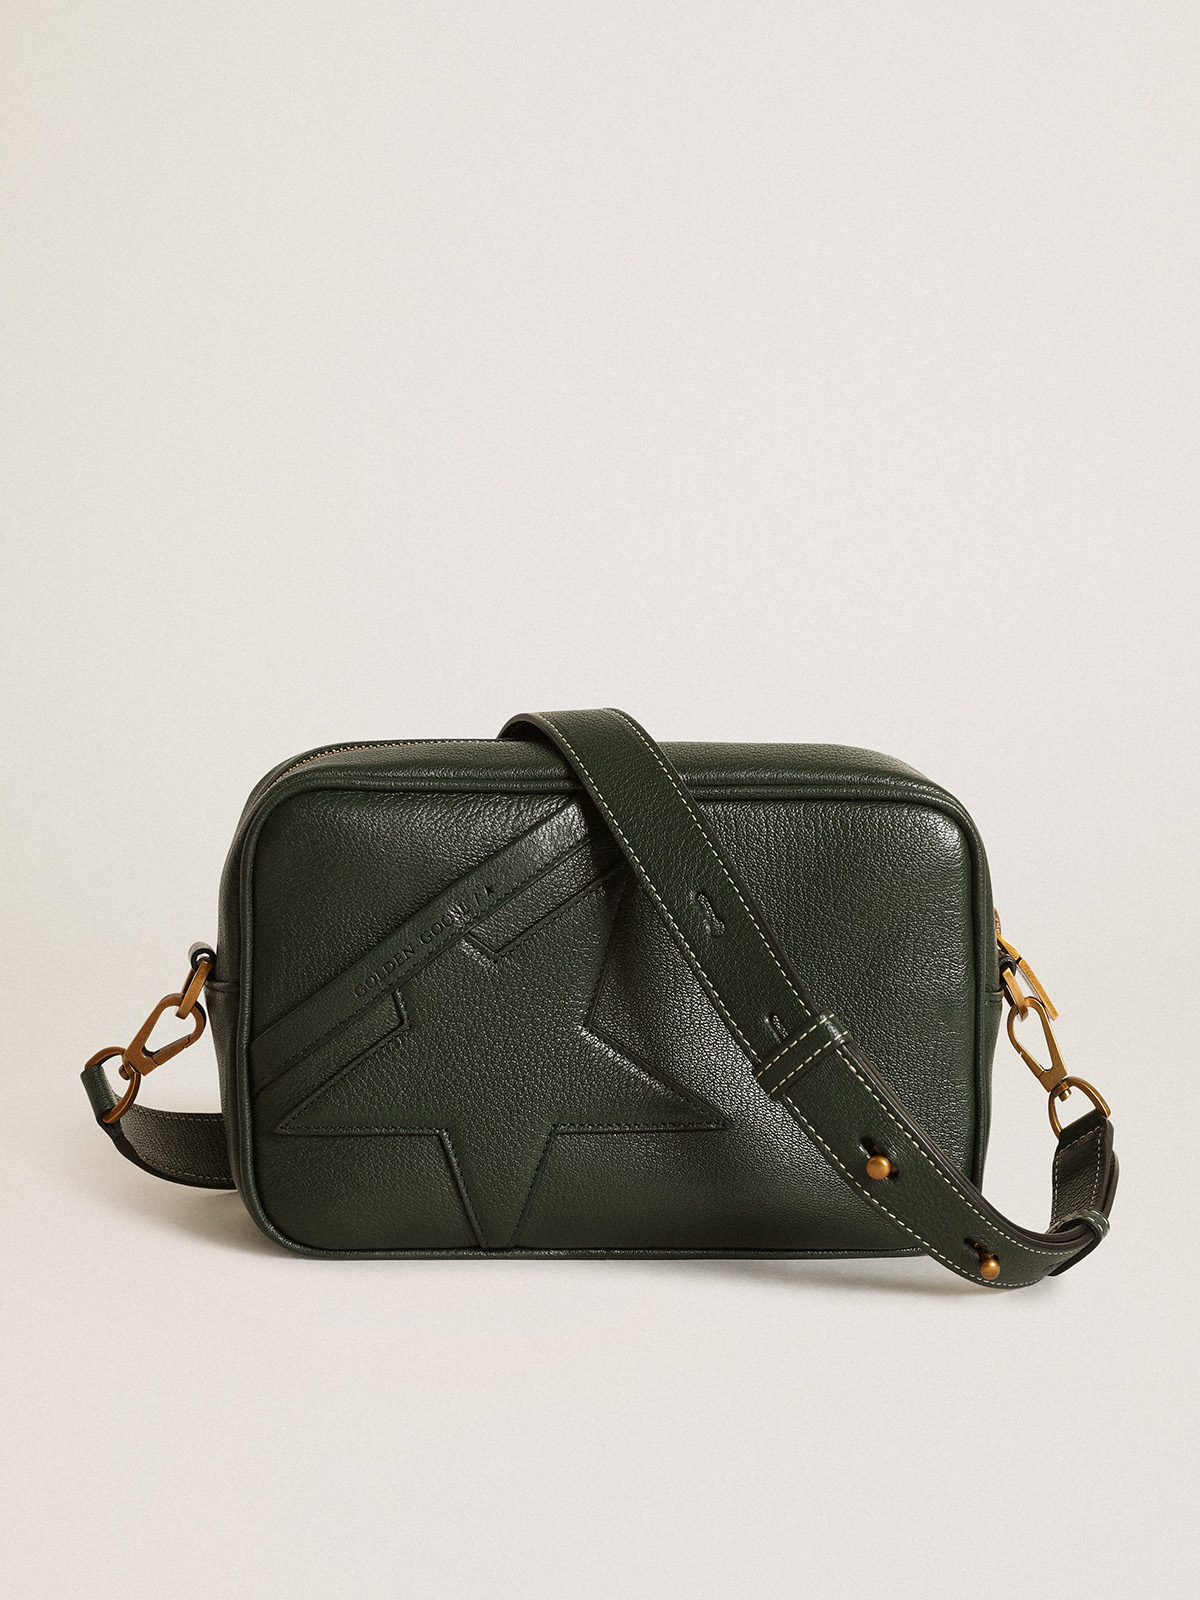 SAINT LAURENT Mini Lou Bag in Green Field color - AUTHENTIC- in BN  condition